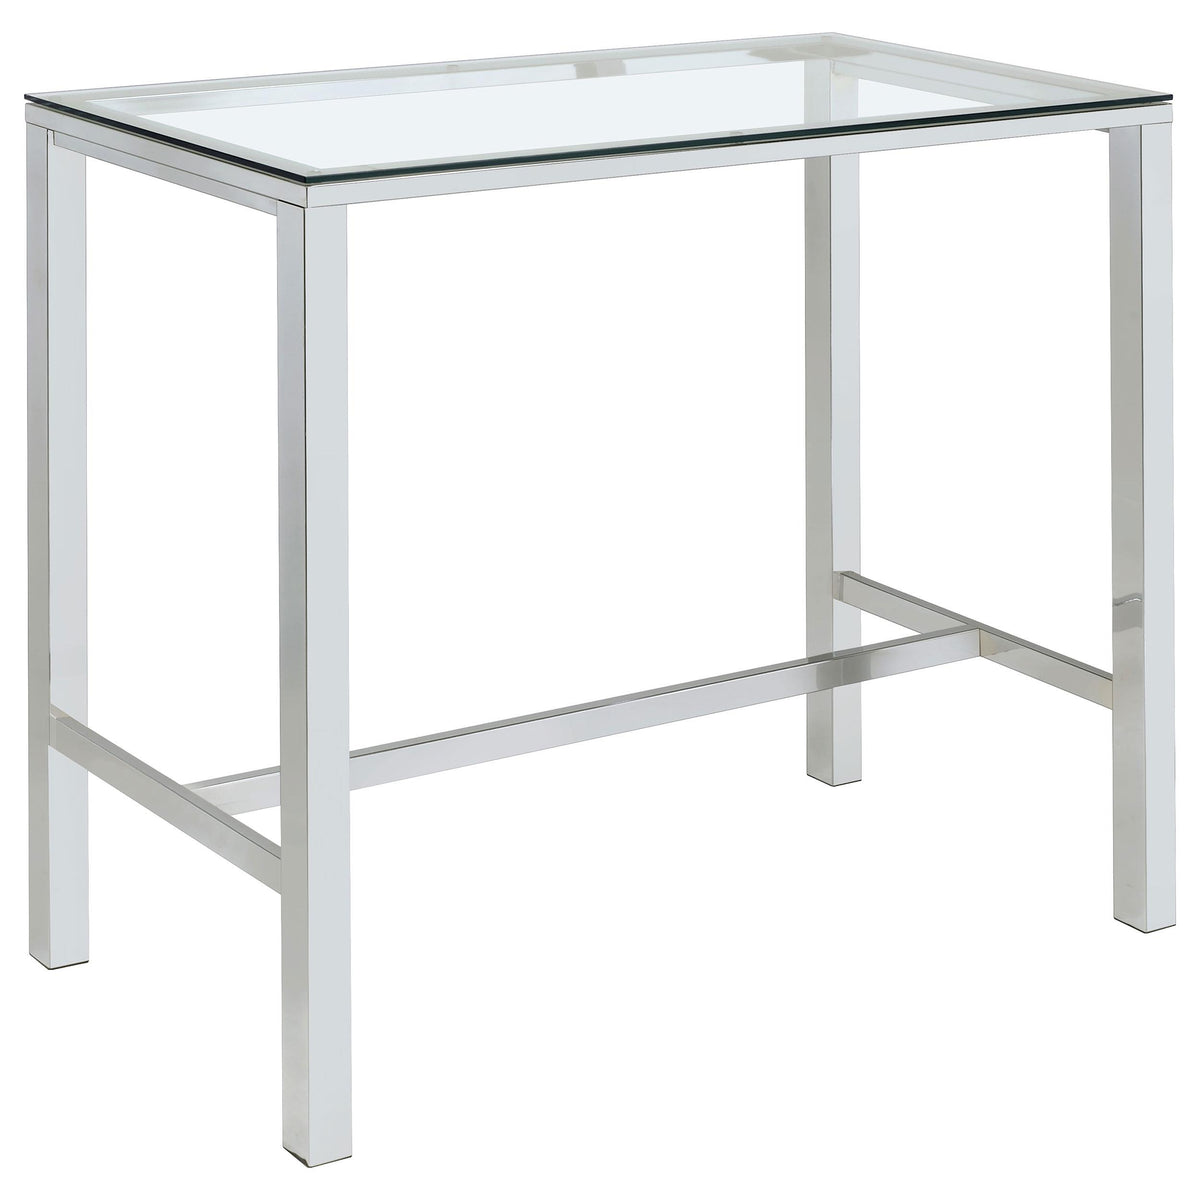 Tolbert Bar Table with Glass Top Chrome Tolbert Bar Table with Glass Top Chrome Half Price Furniture